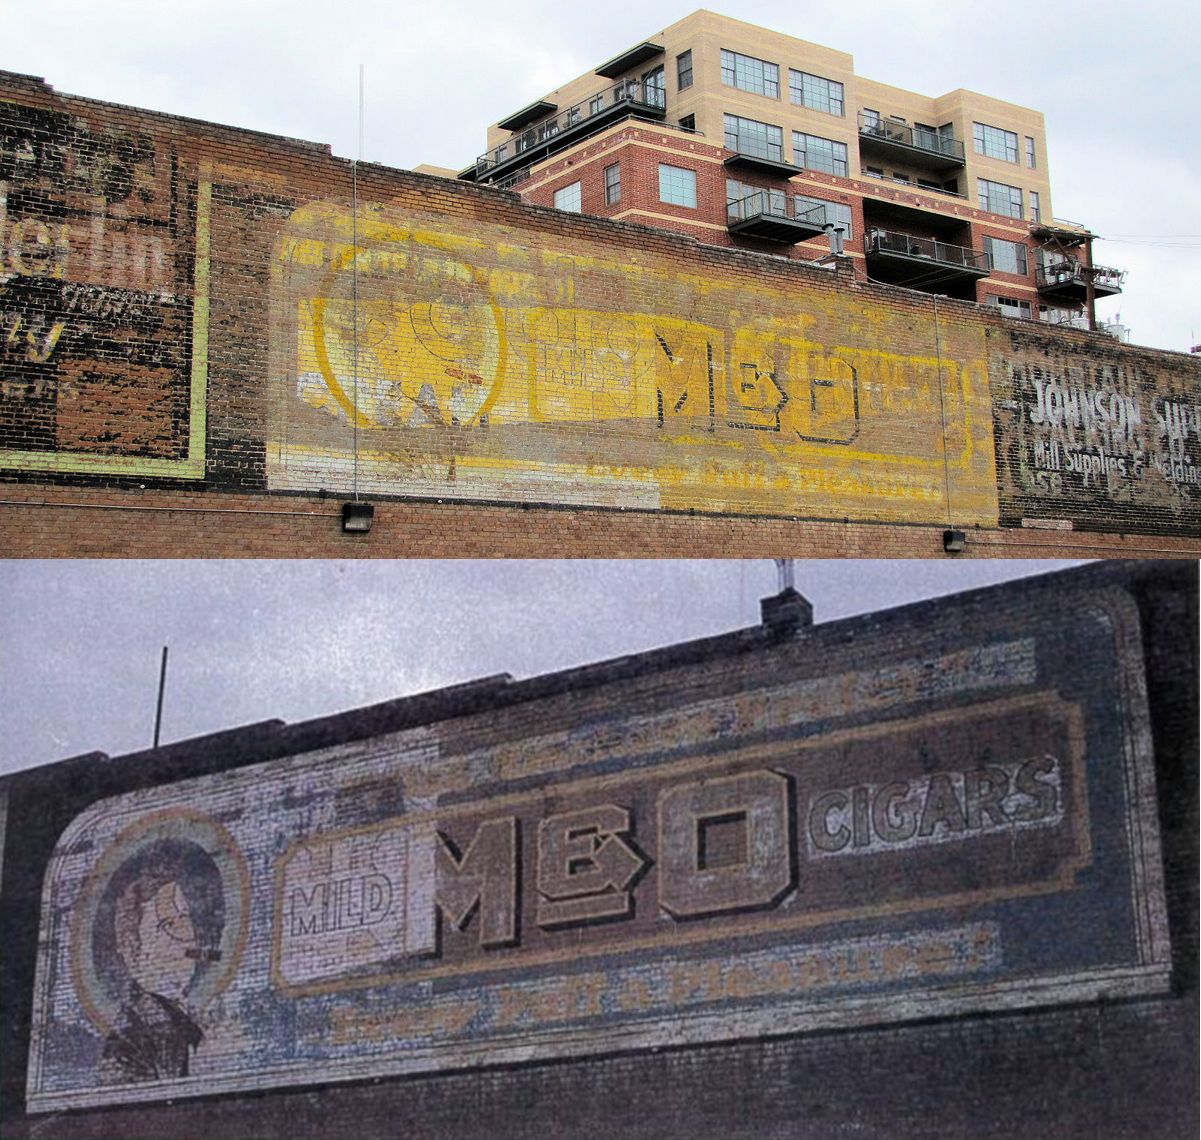 Contemporary and archival images of a fading painted sign advertising M&O Cigars.